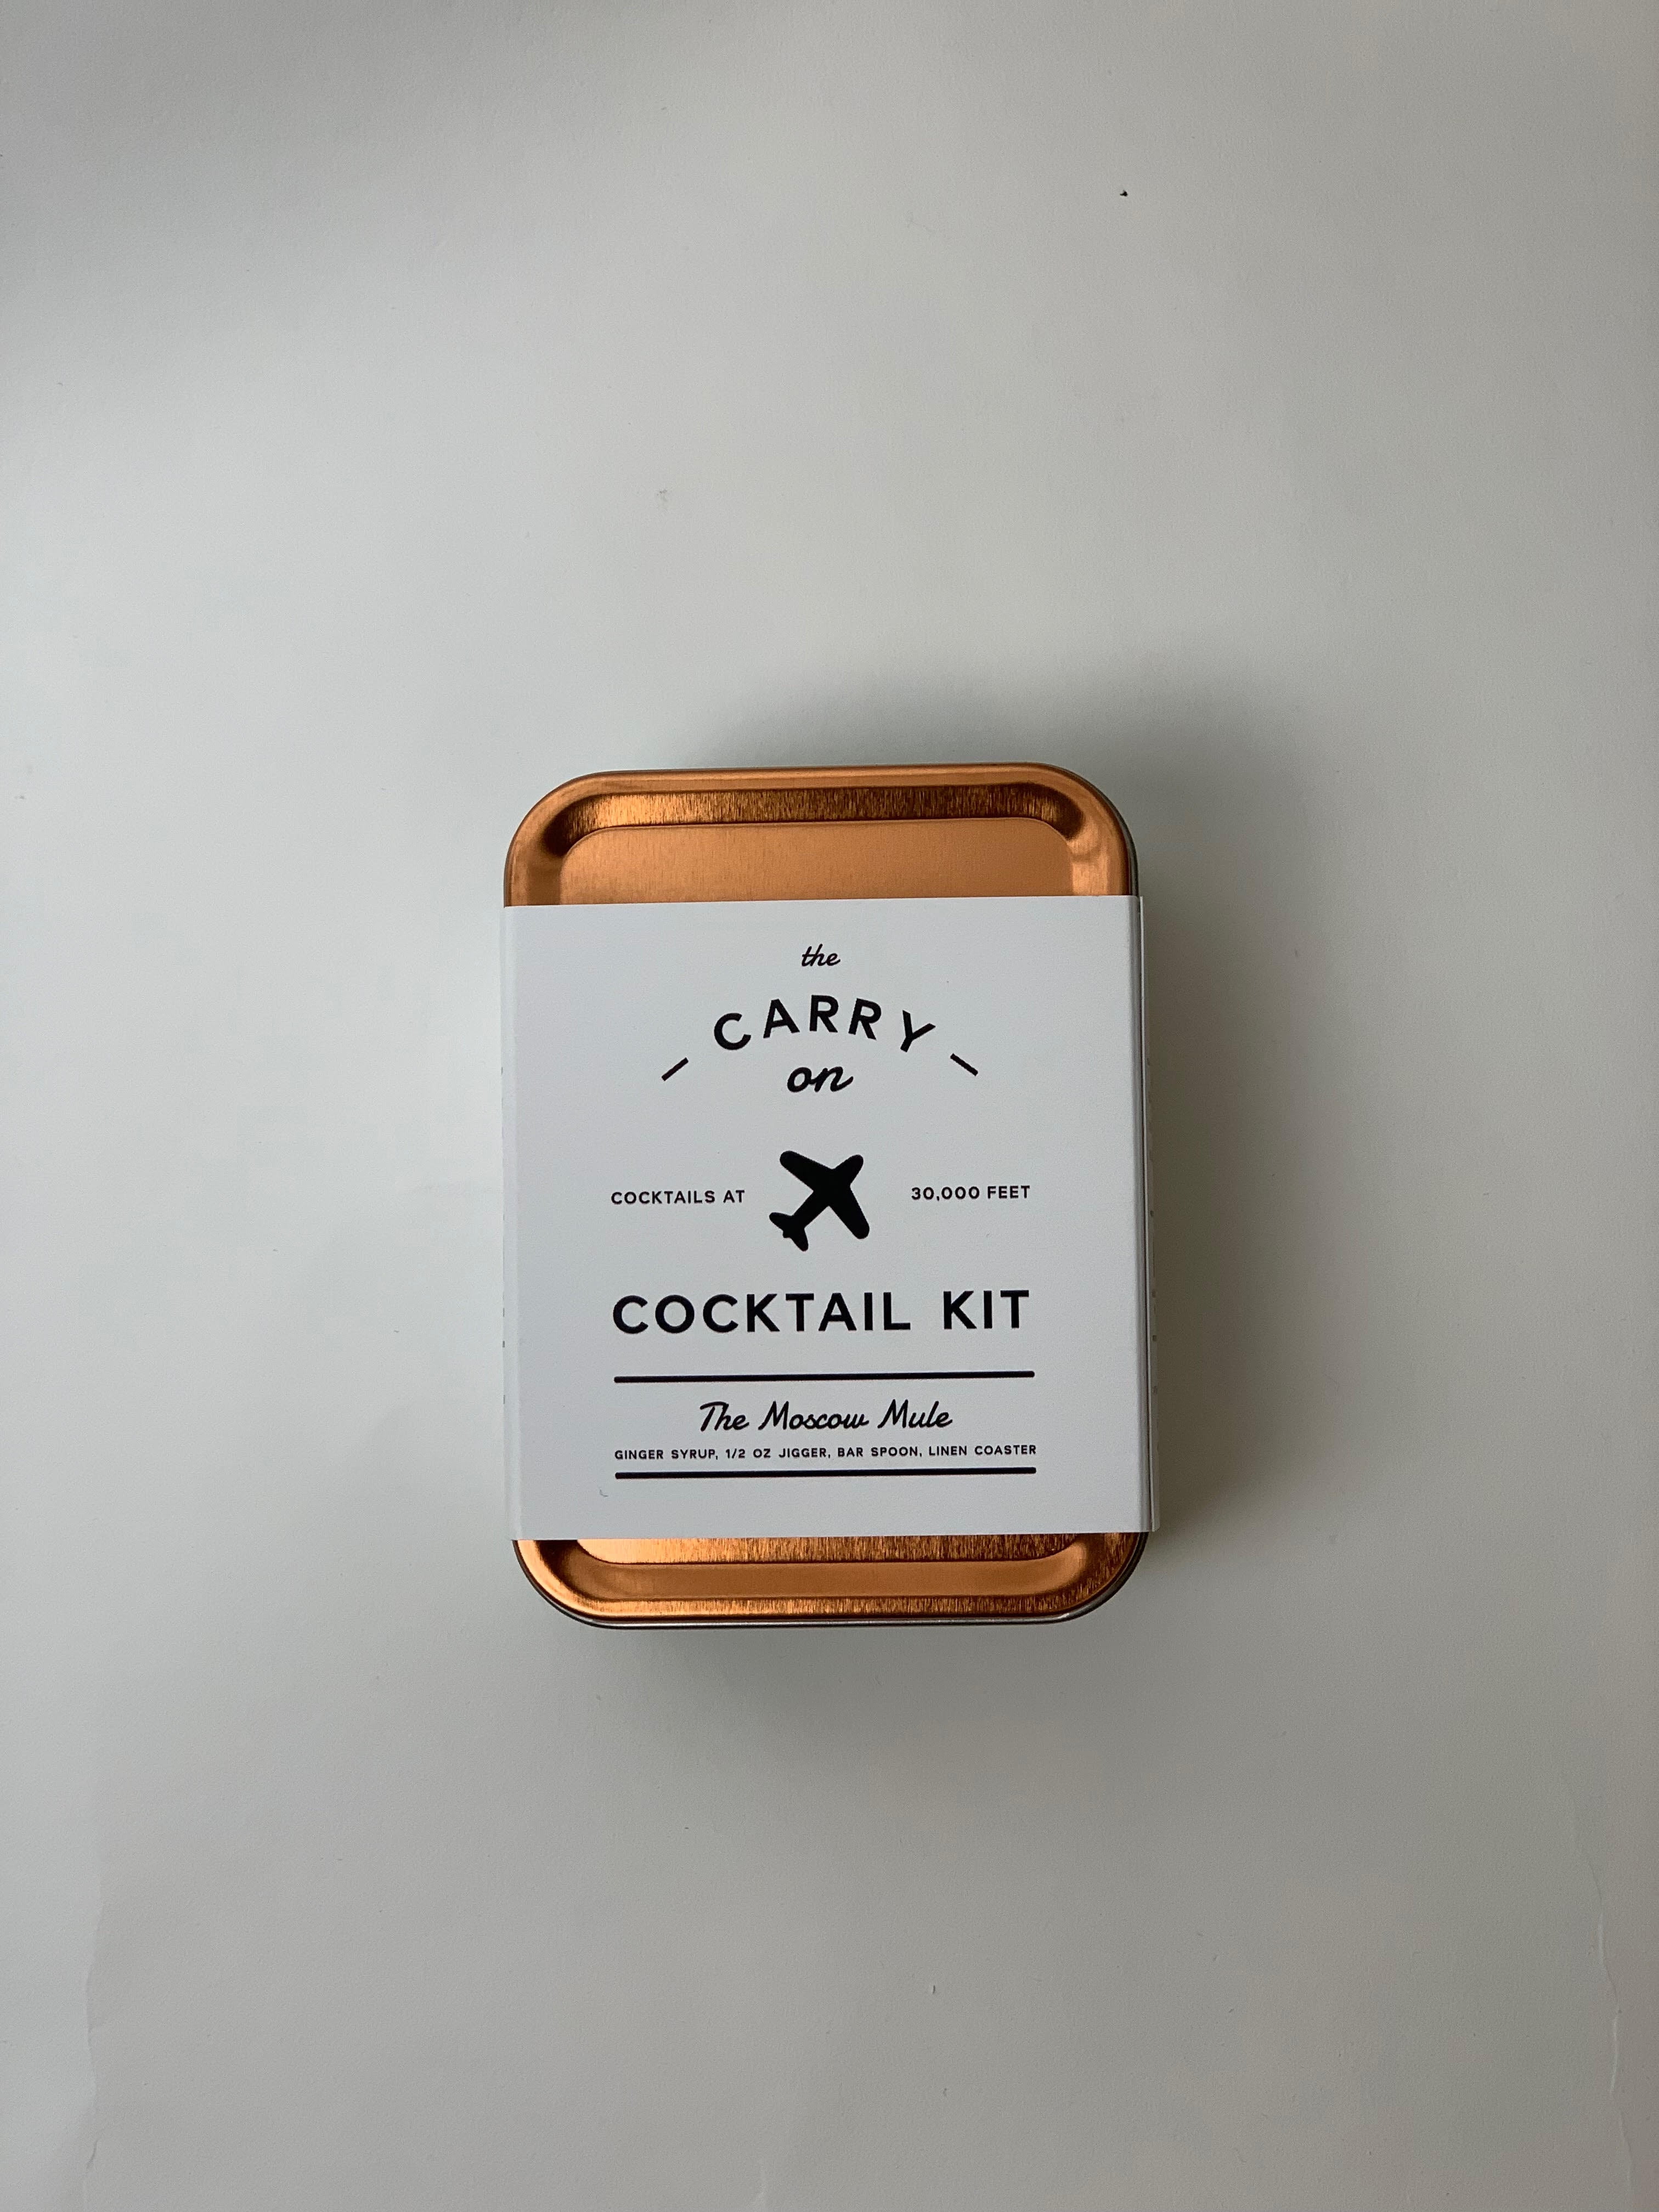 Carry on Cocktail Kit, Moscow Mule and Margarita, Travel Kit for Drinks on  the Go, Craft Cocktails, Makes 4 Premium Cocktails, TSA Approved